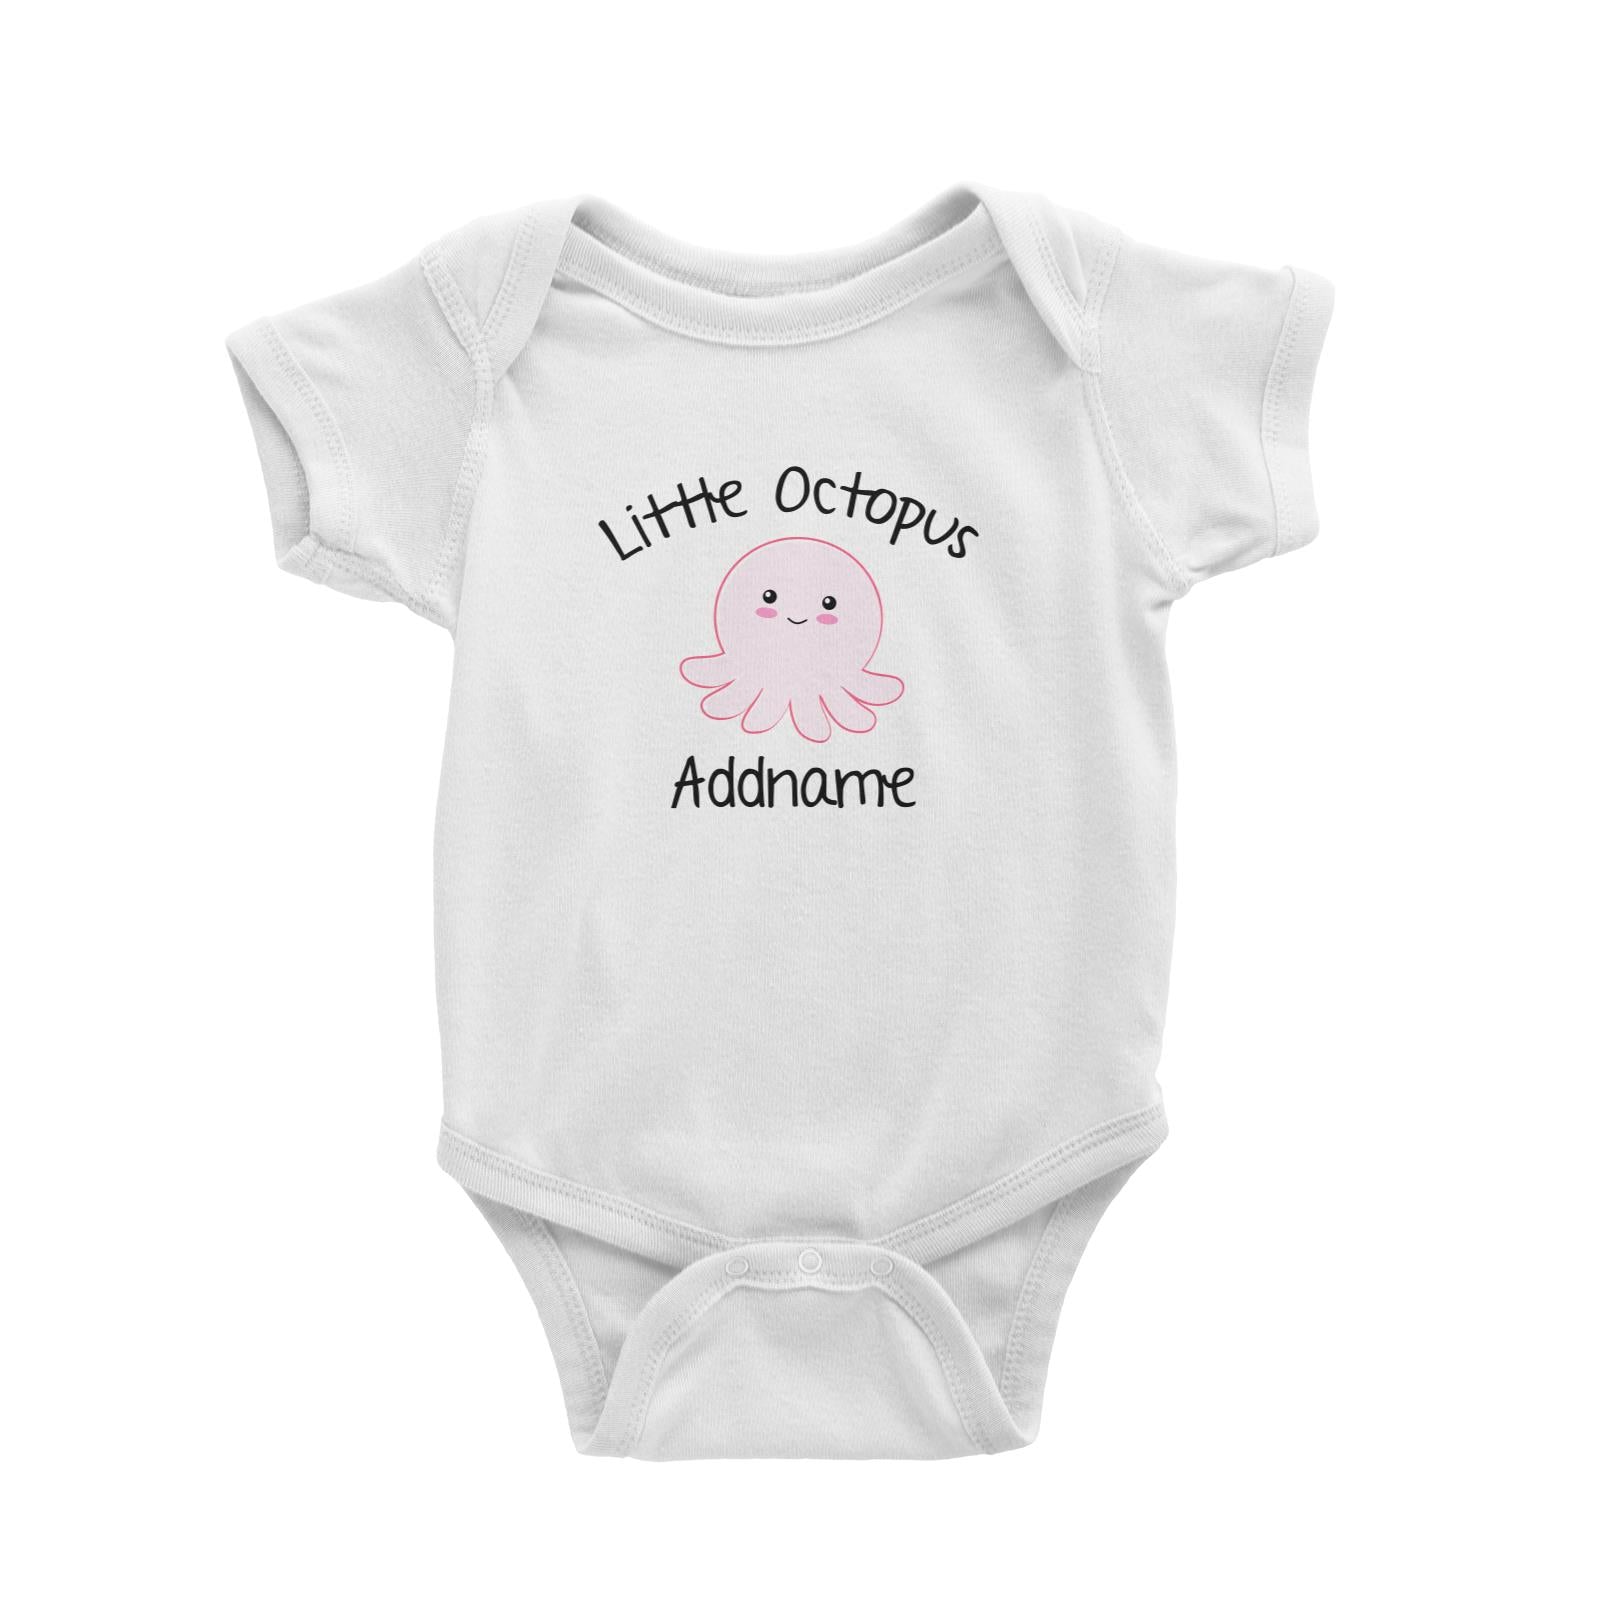 Cute Animals And Friends Series Little Octopus Boy Addname Baby Romper